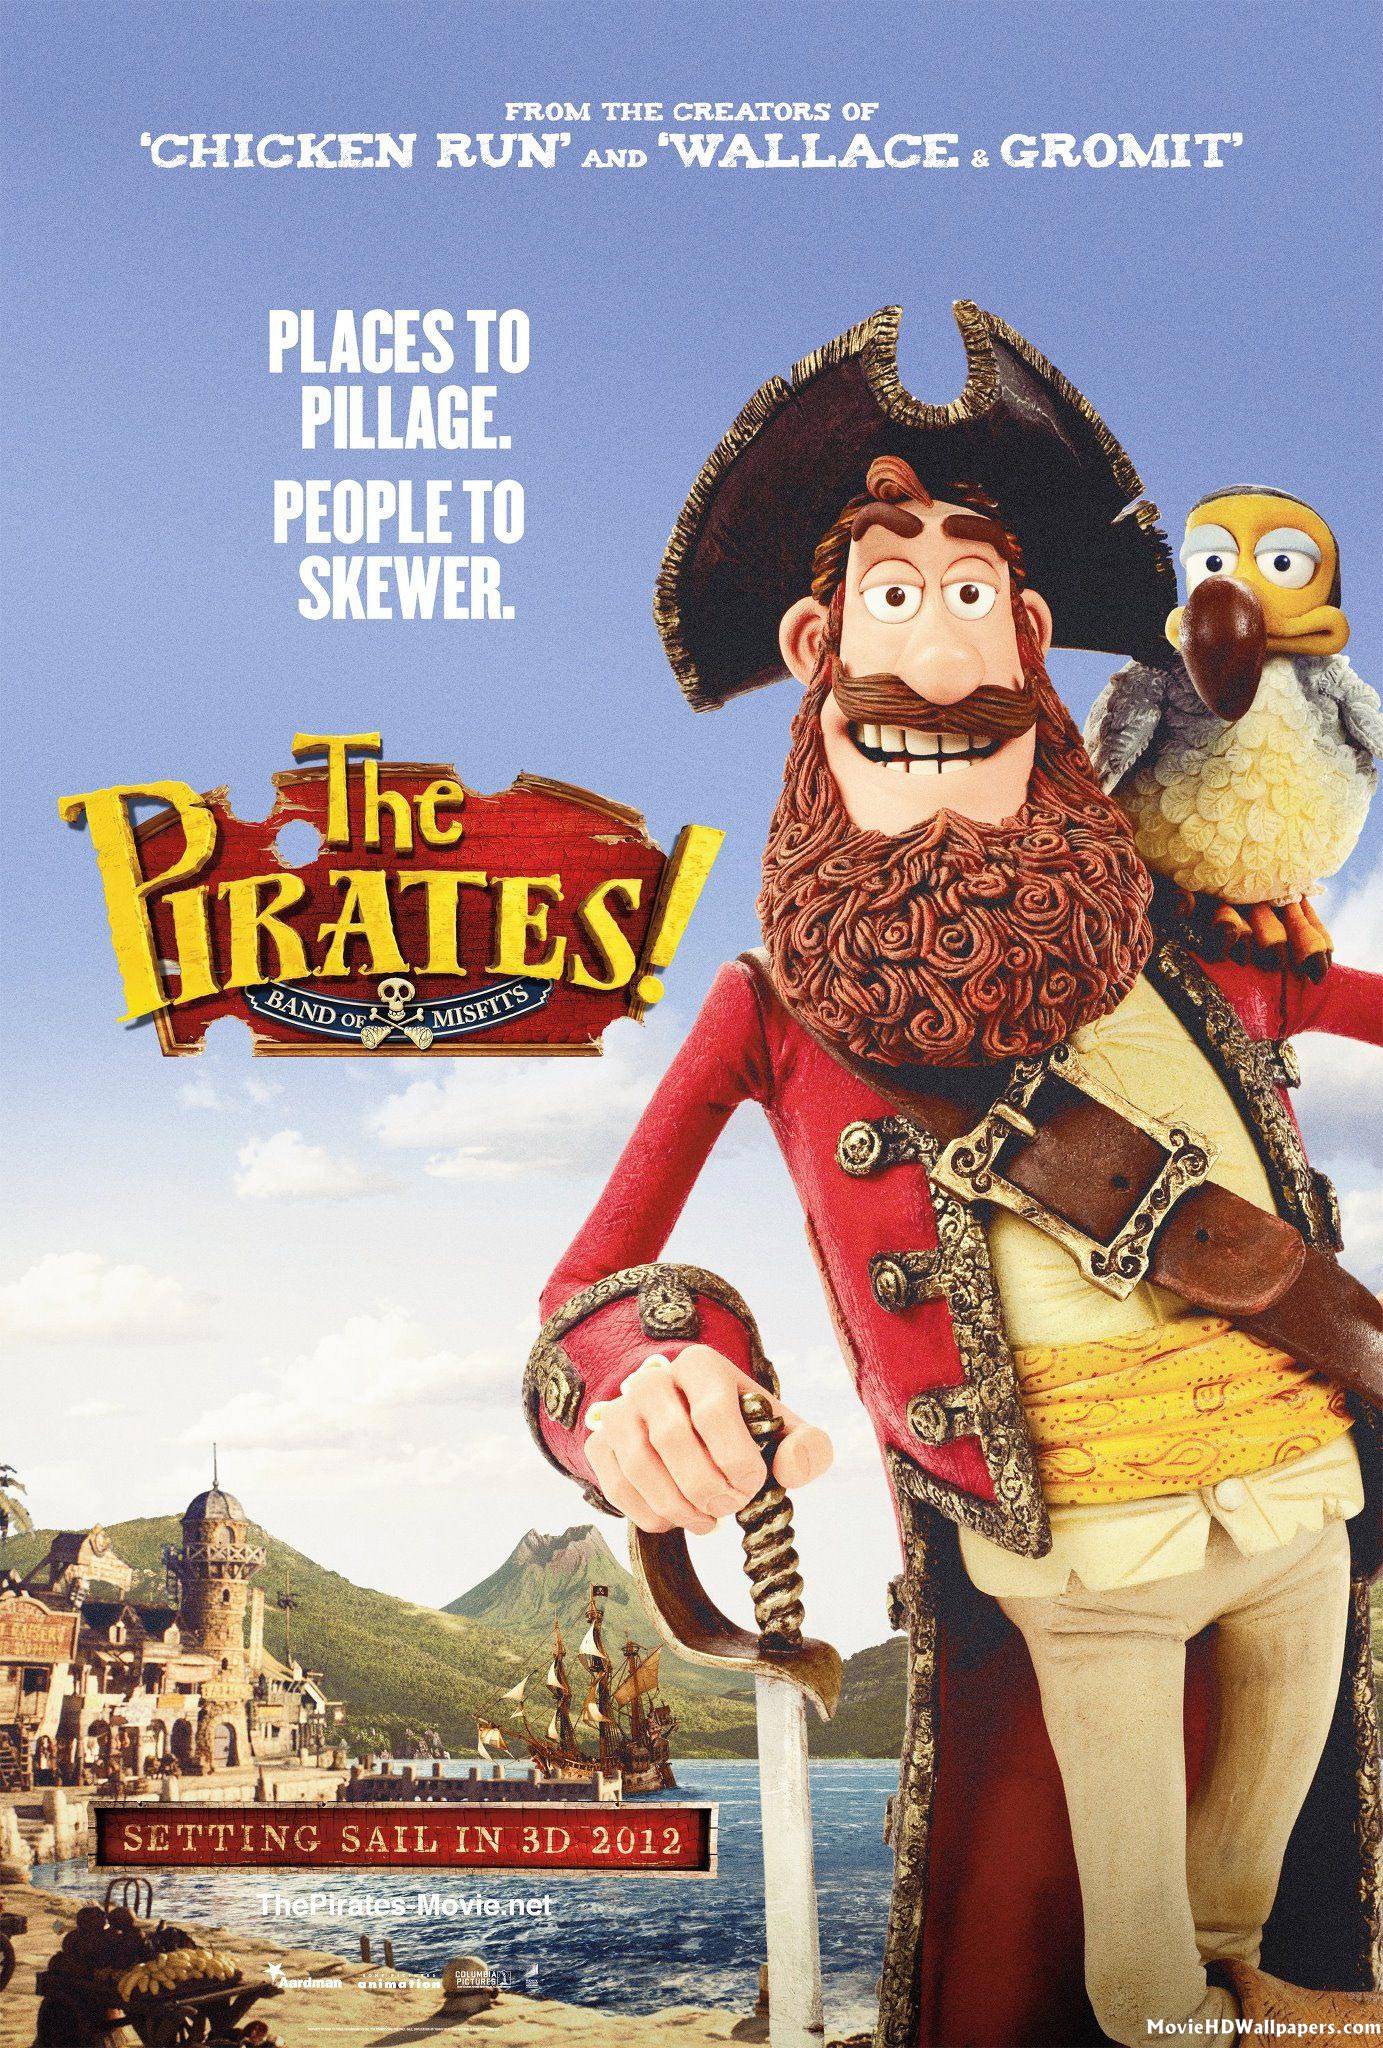 The Pirates! Band of Misfits (2012) HD Wallpapers